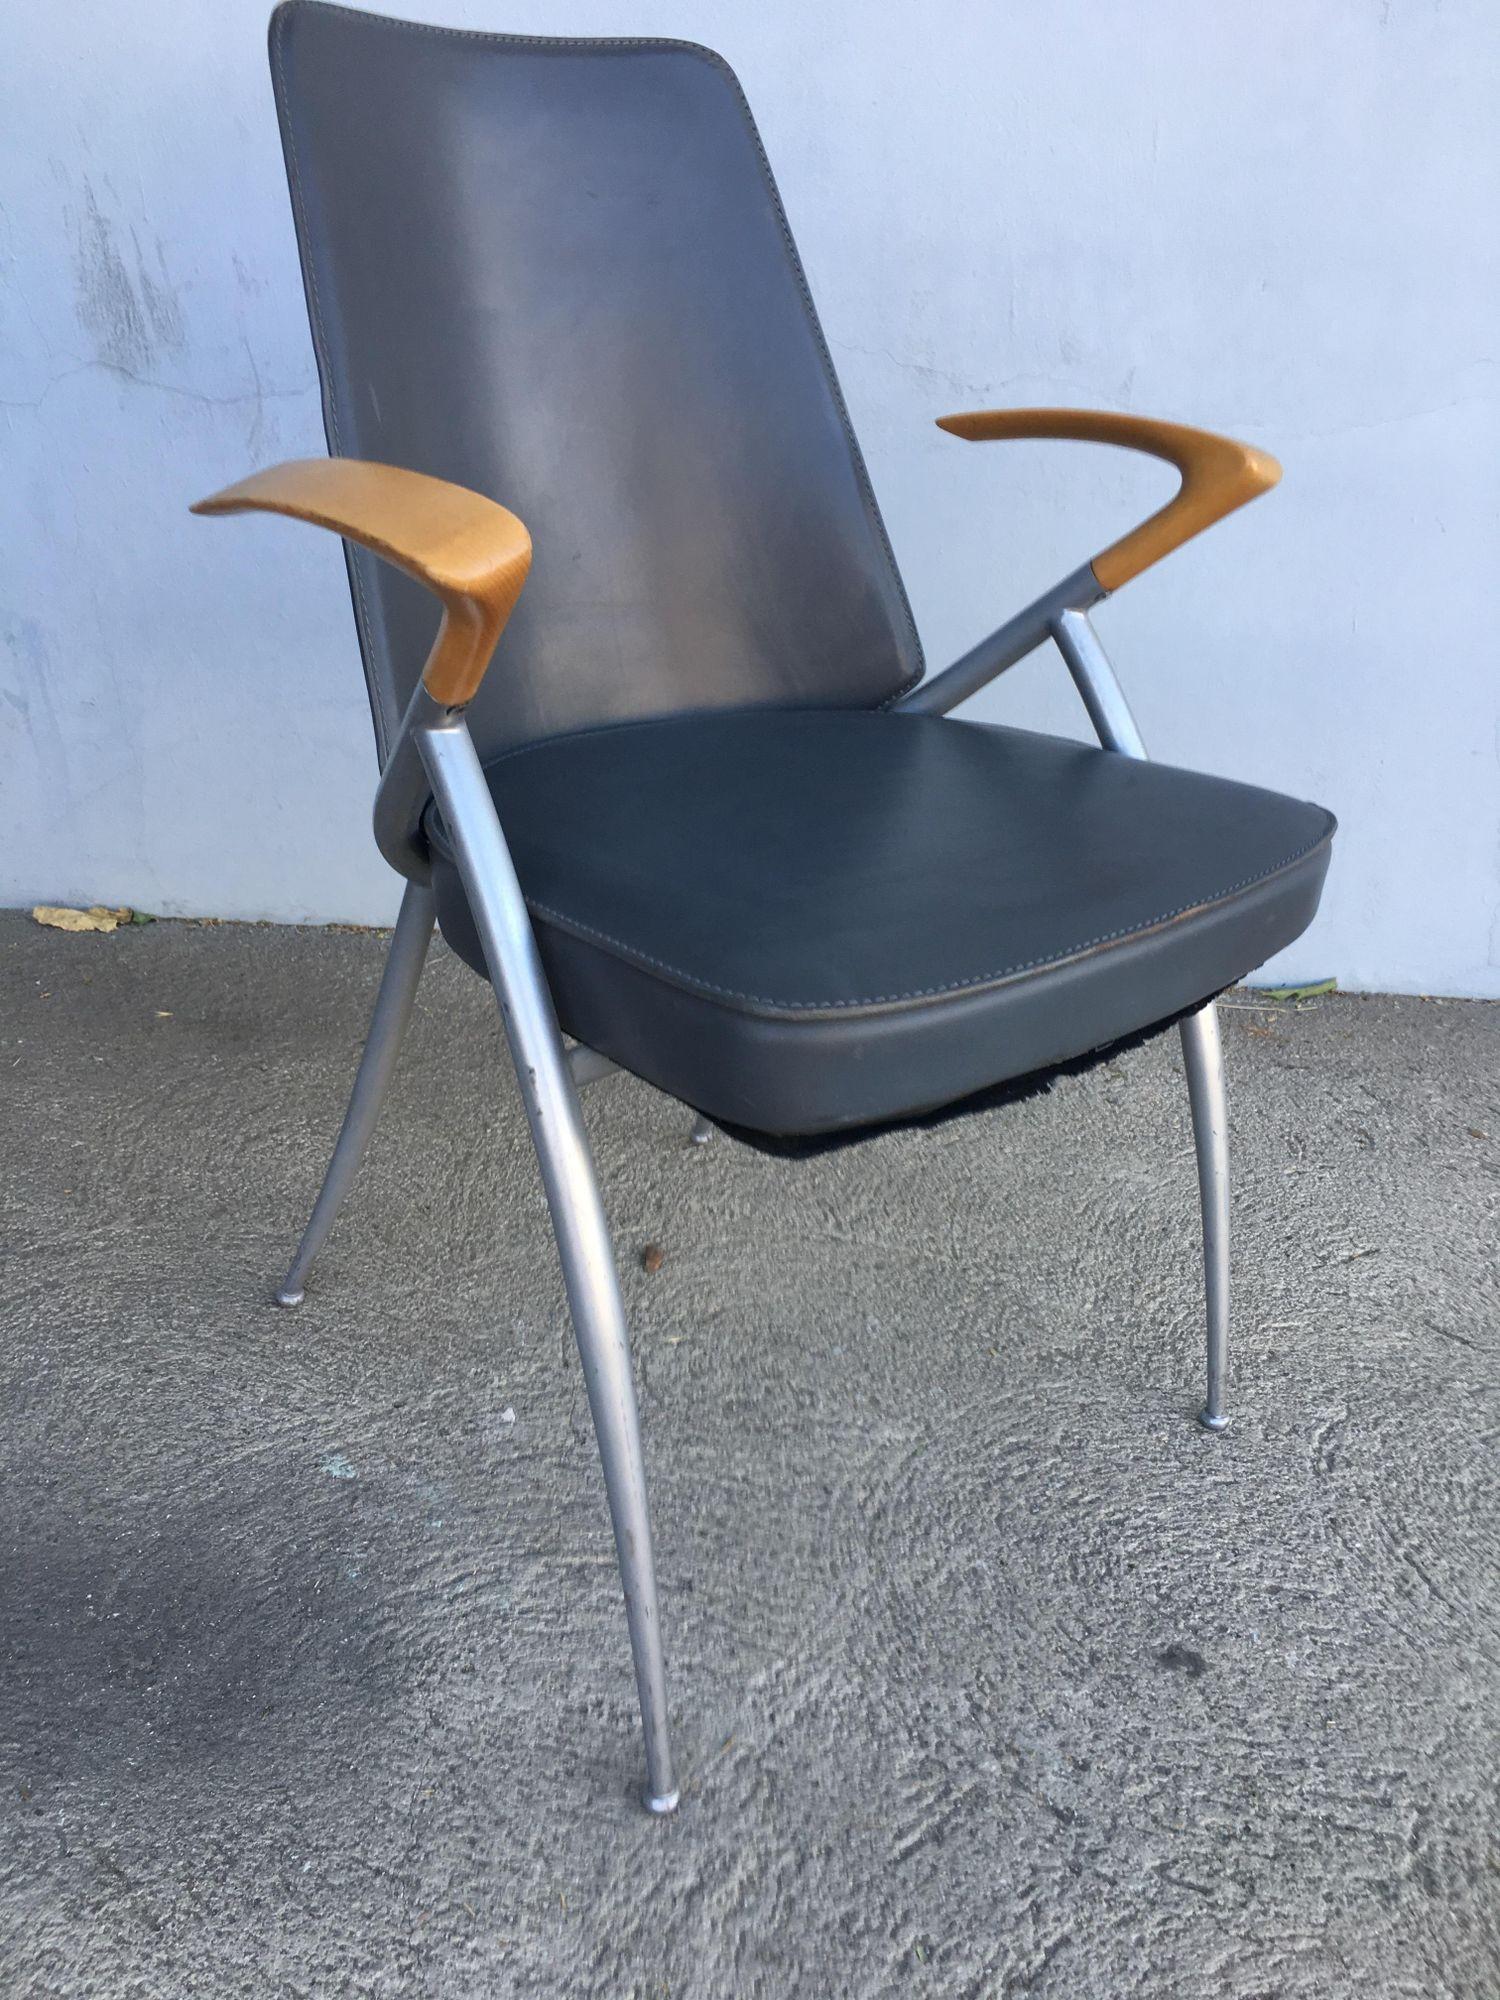 Modernist leather office chair (can be used as dining chair) with silver powder coat base and unique floating cherry oak wing back armrest.

